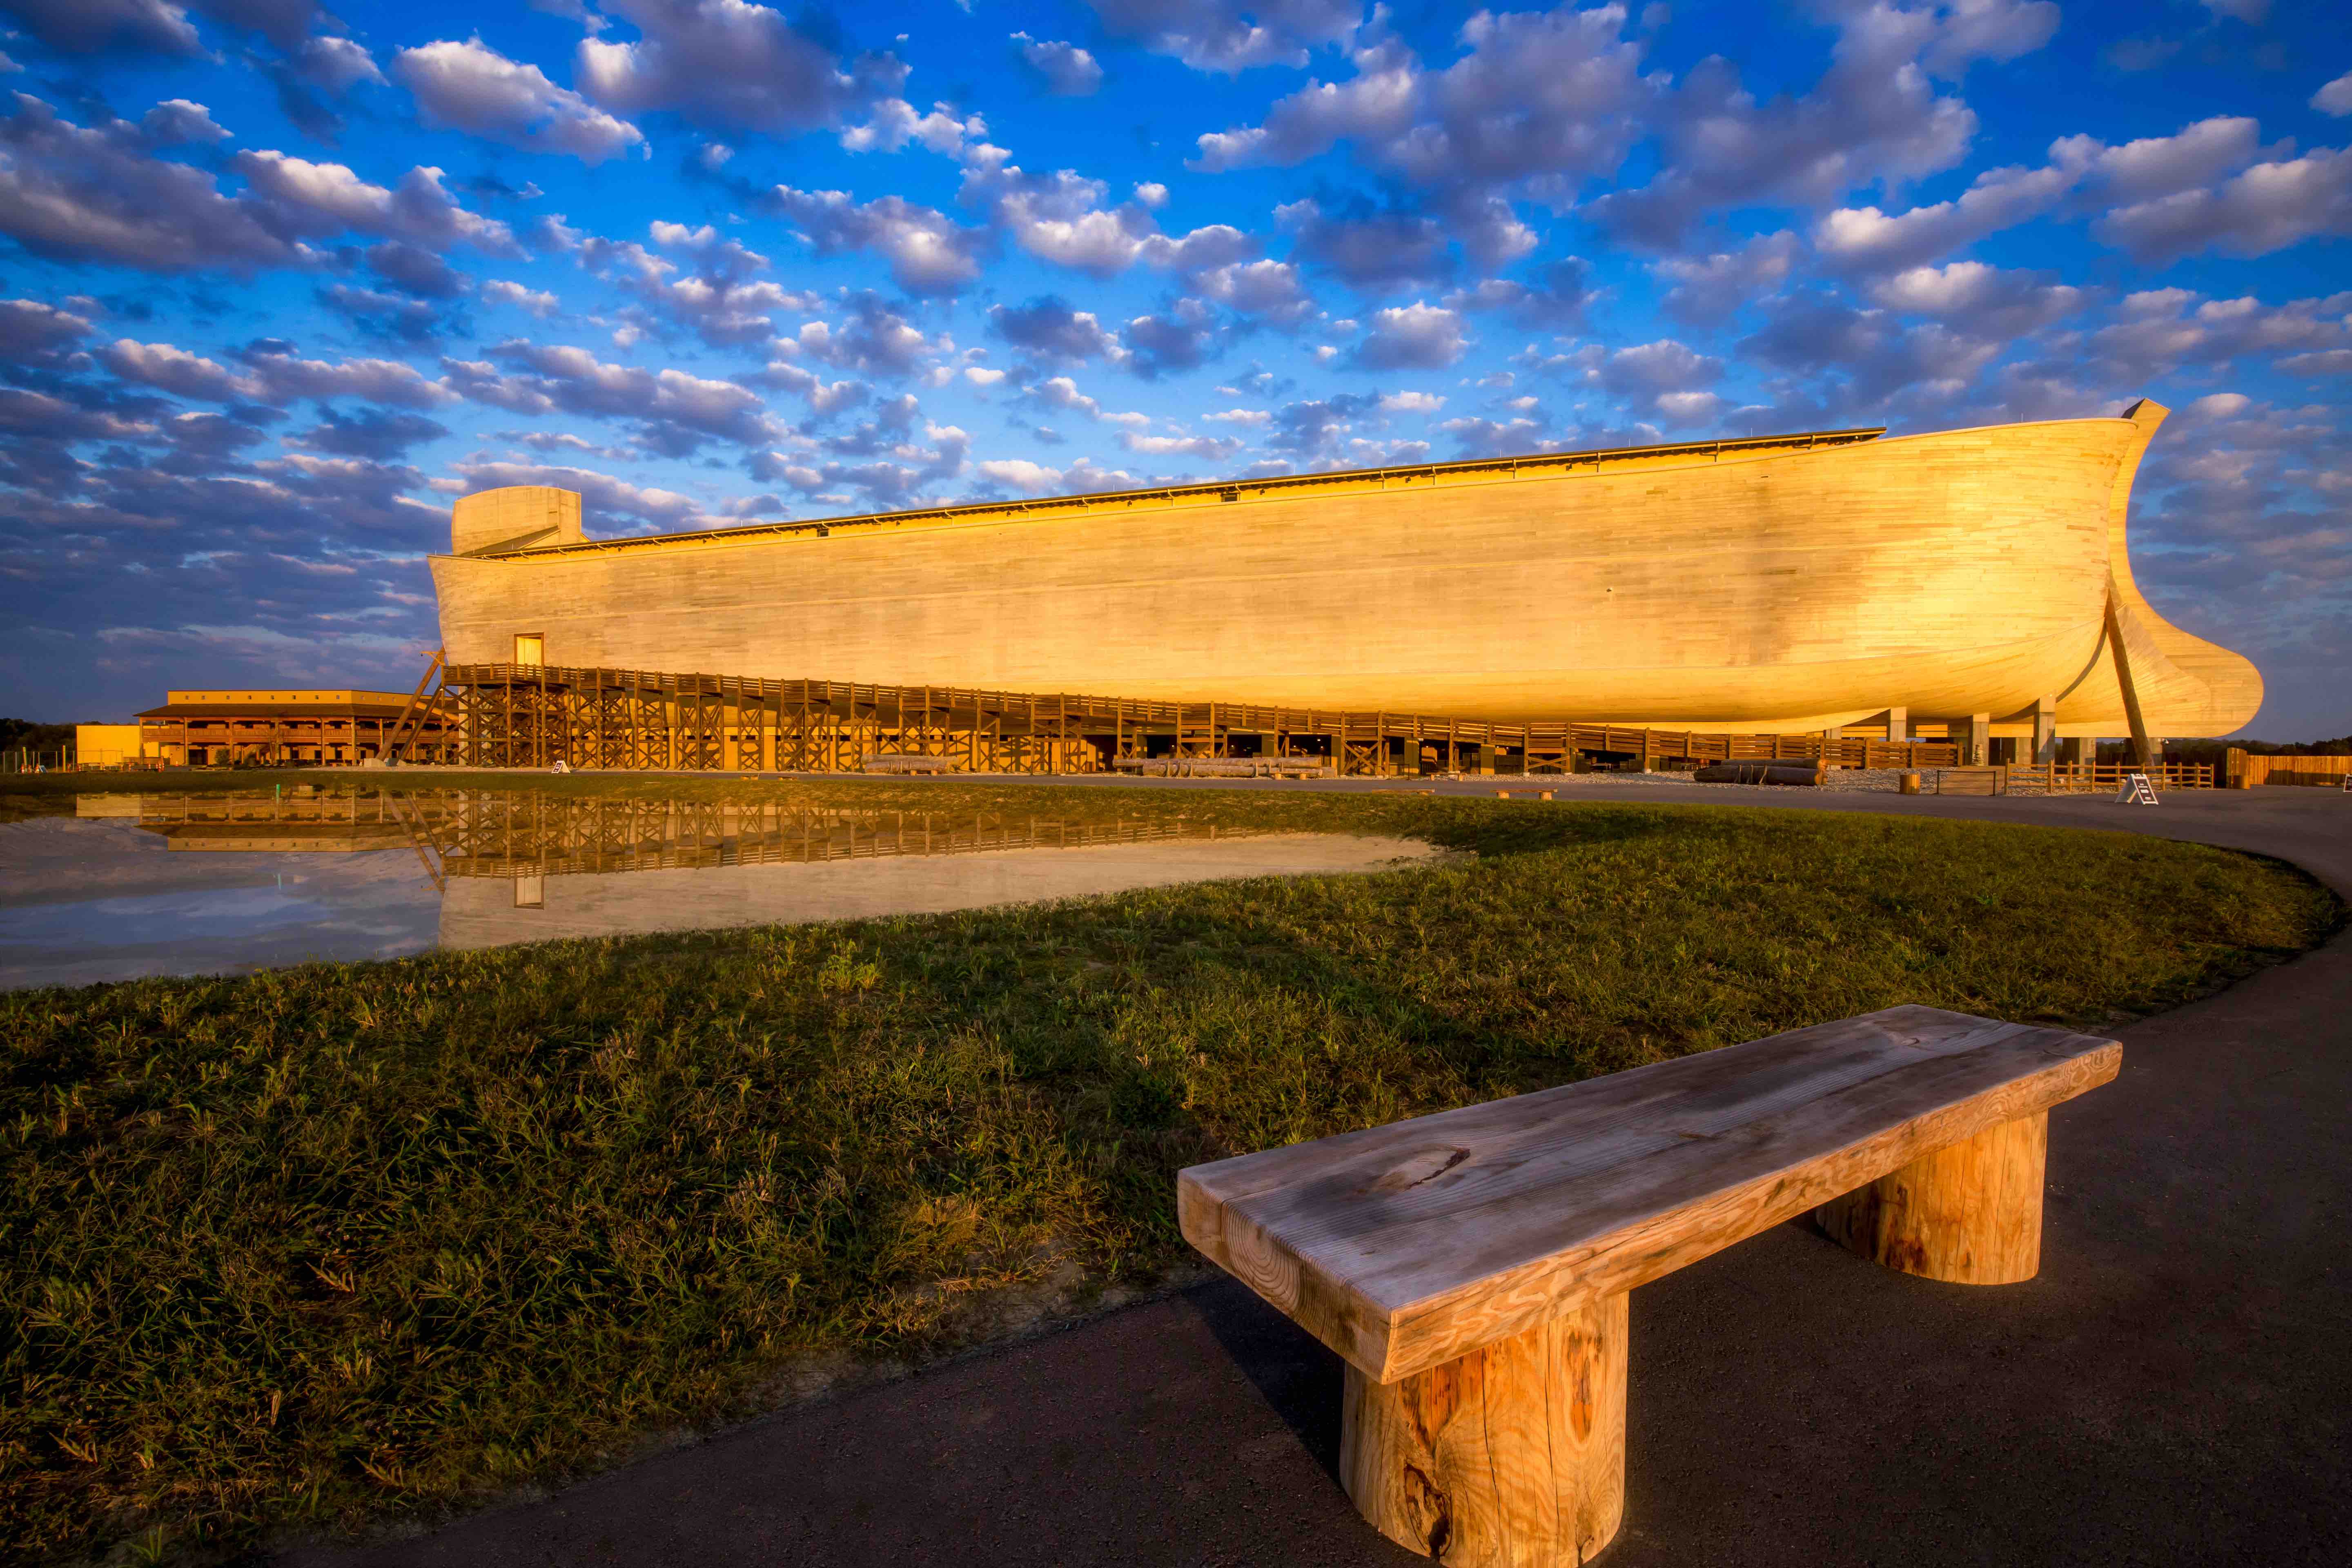 Full-size replica of Noah’s Ark on display at the Ark Encounter